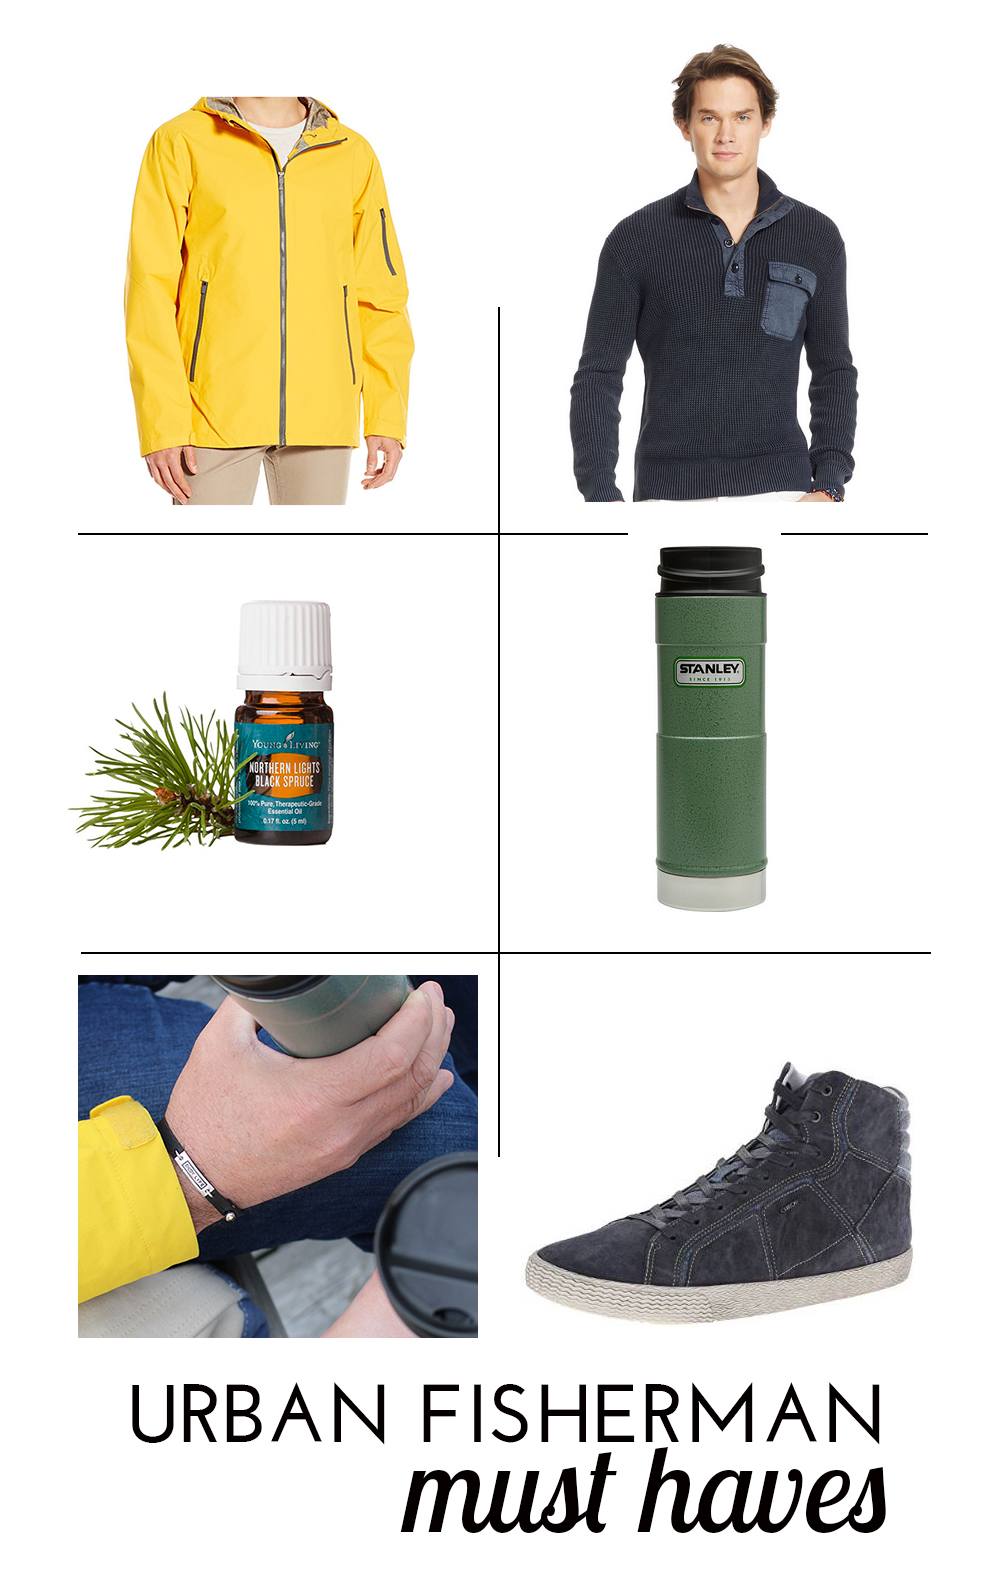 Urban Fisherman trend: must haves to complete the look